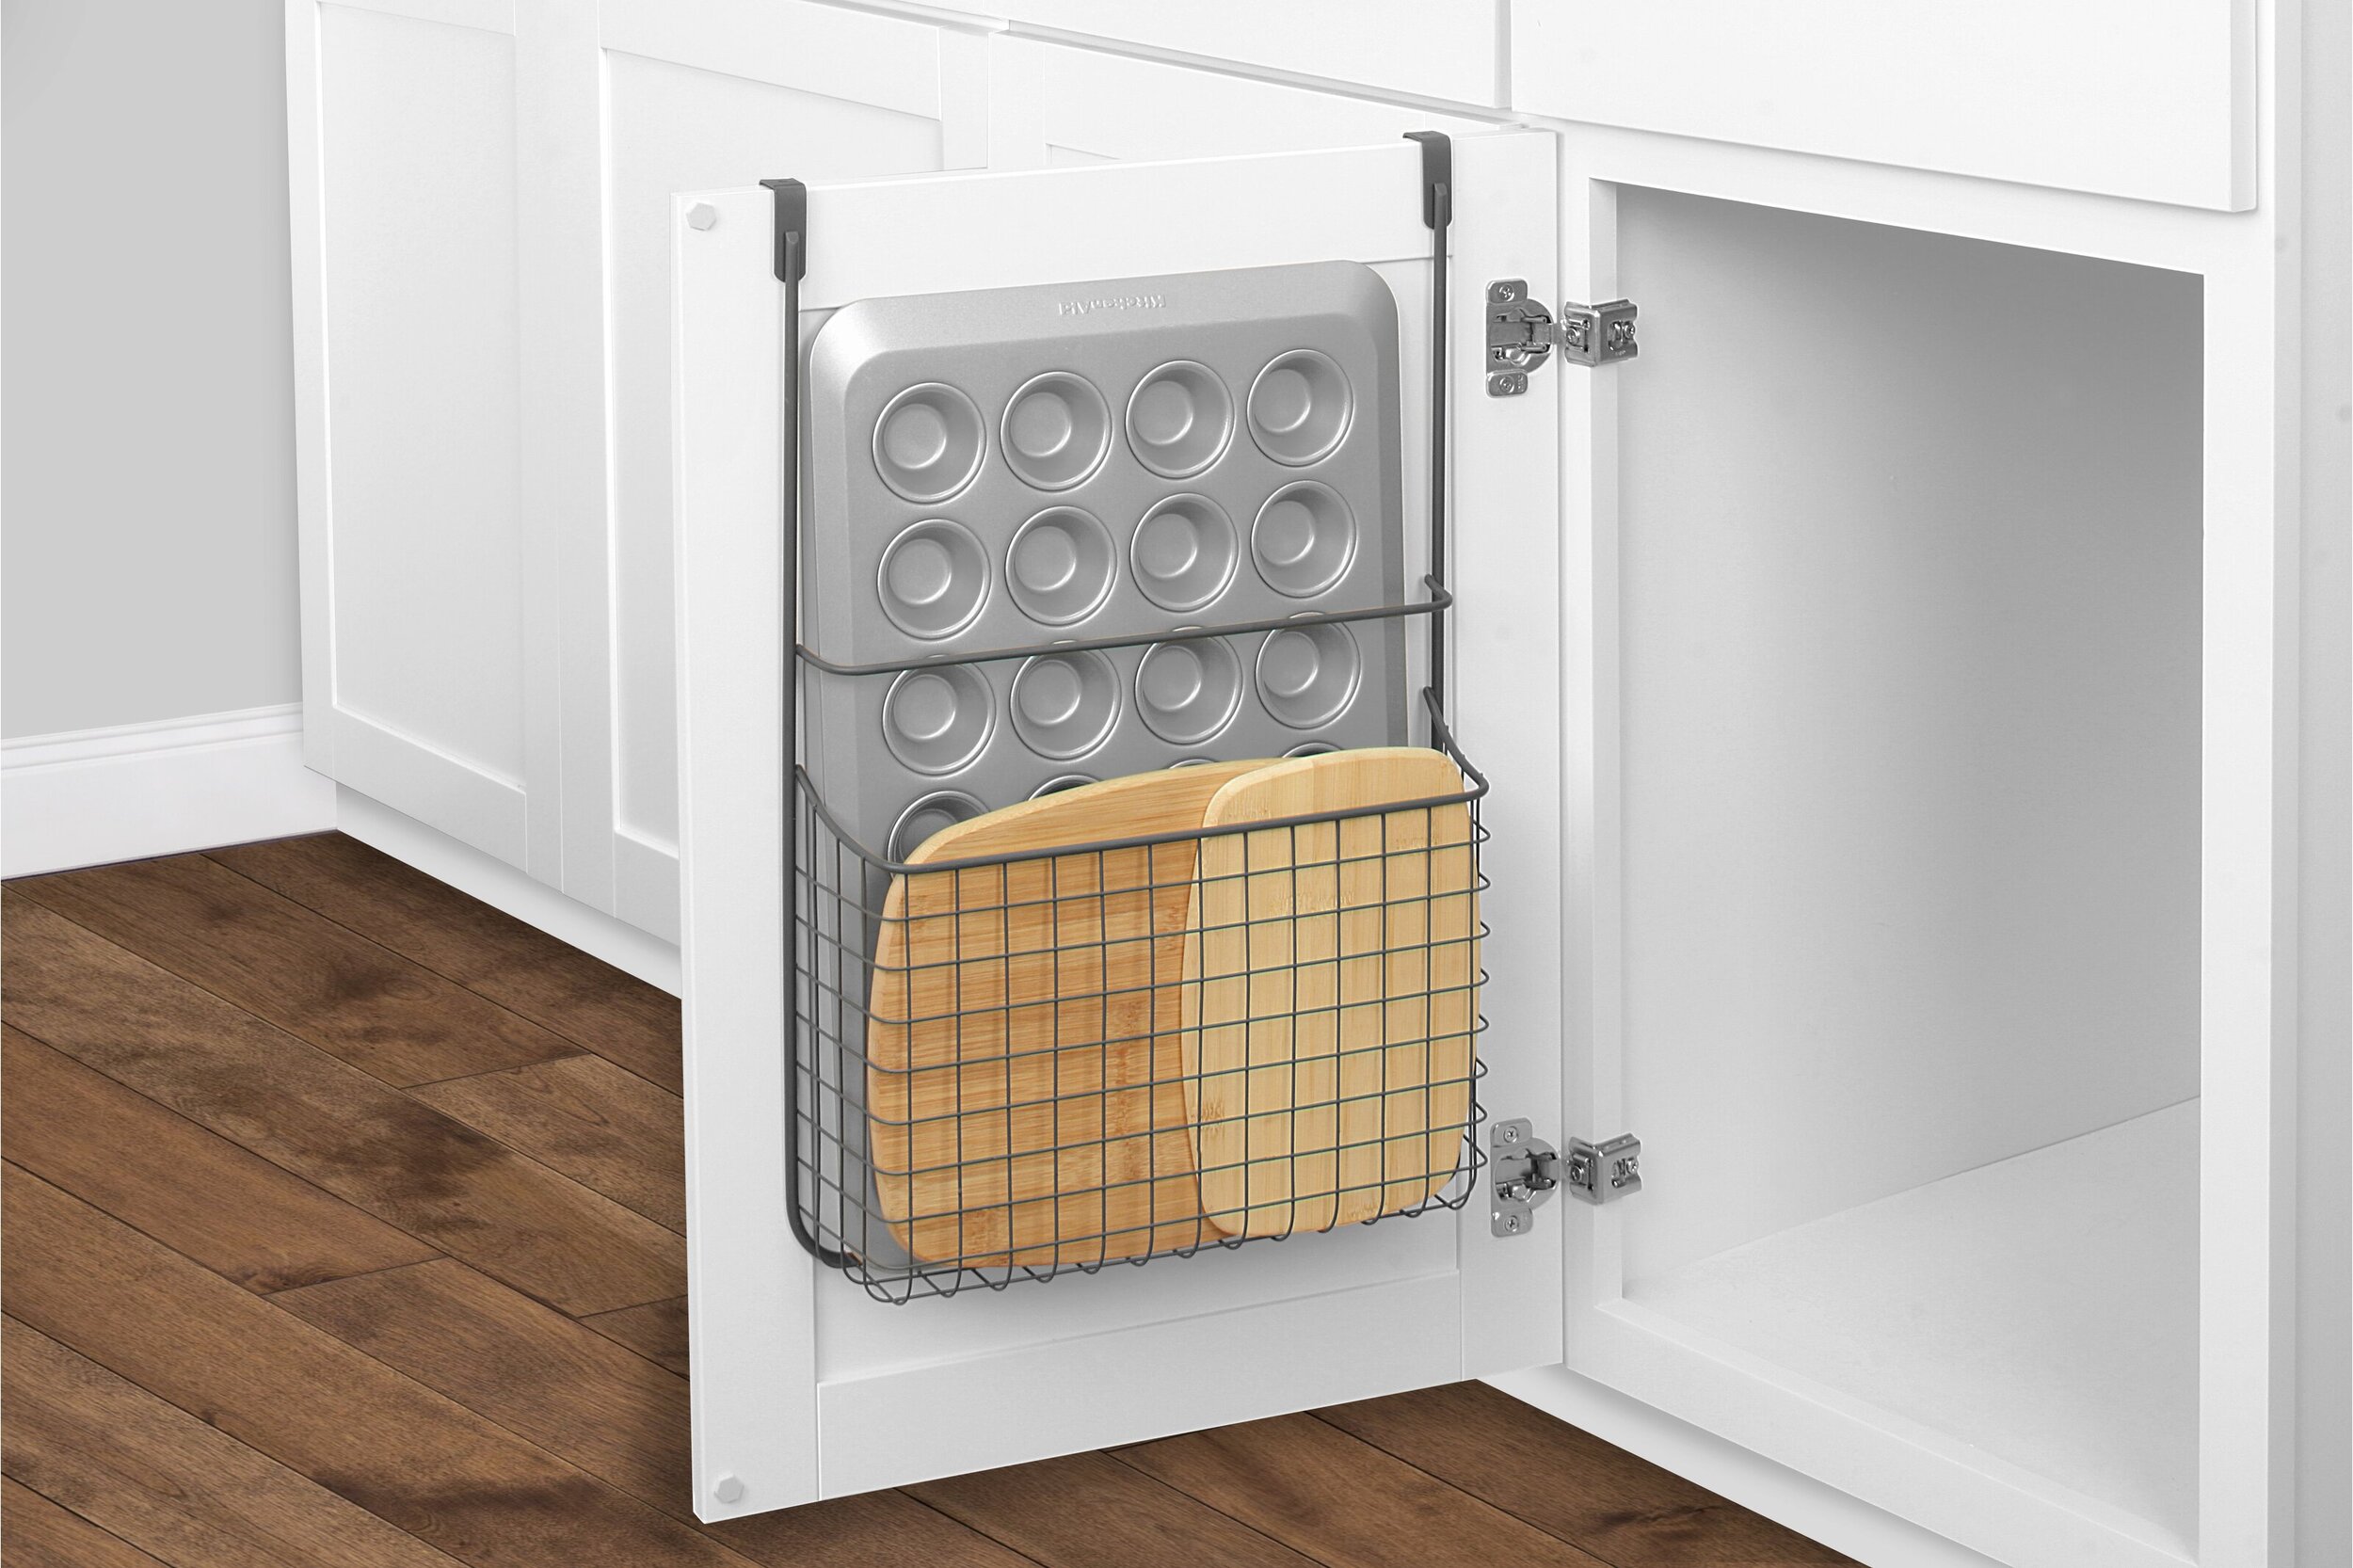 storage solutions for your kitchen 3.jpeg